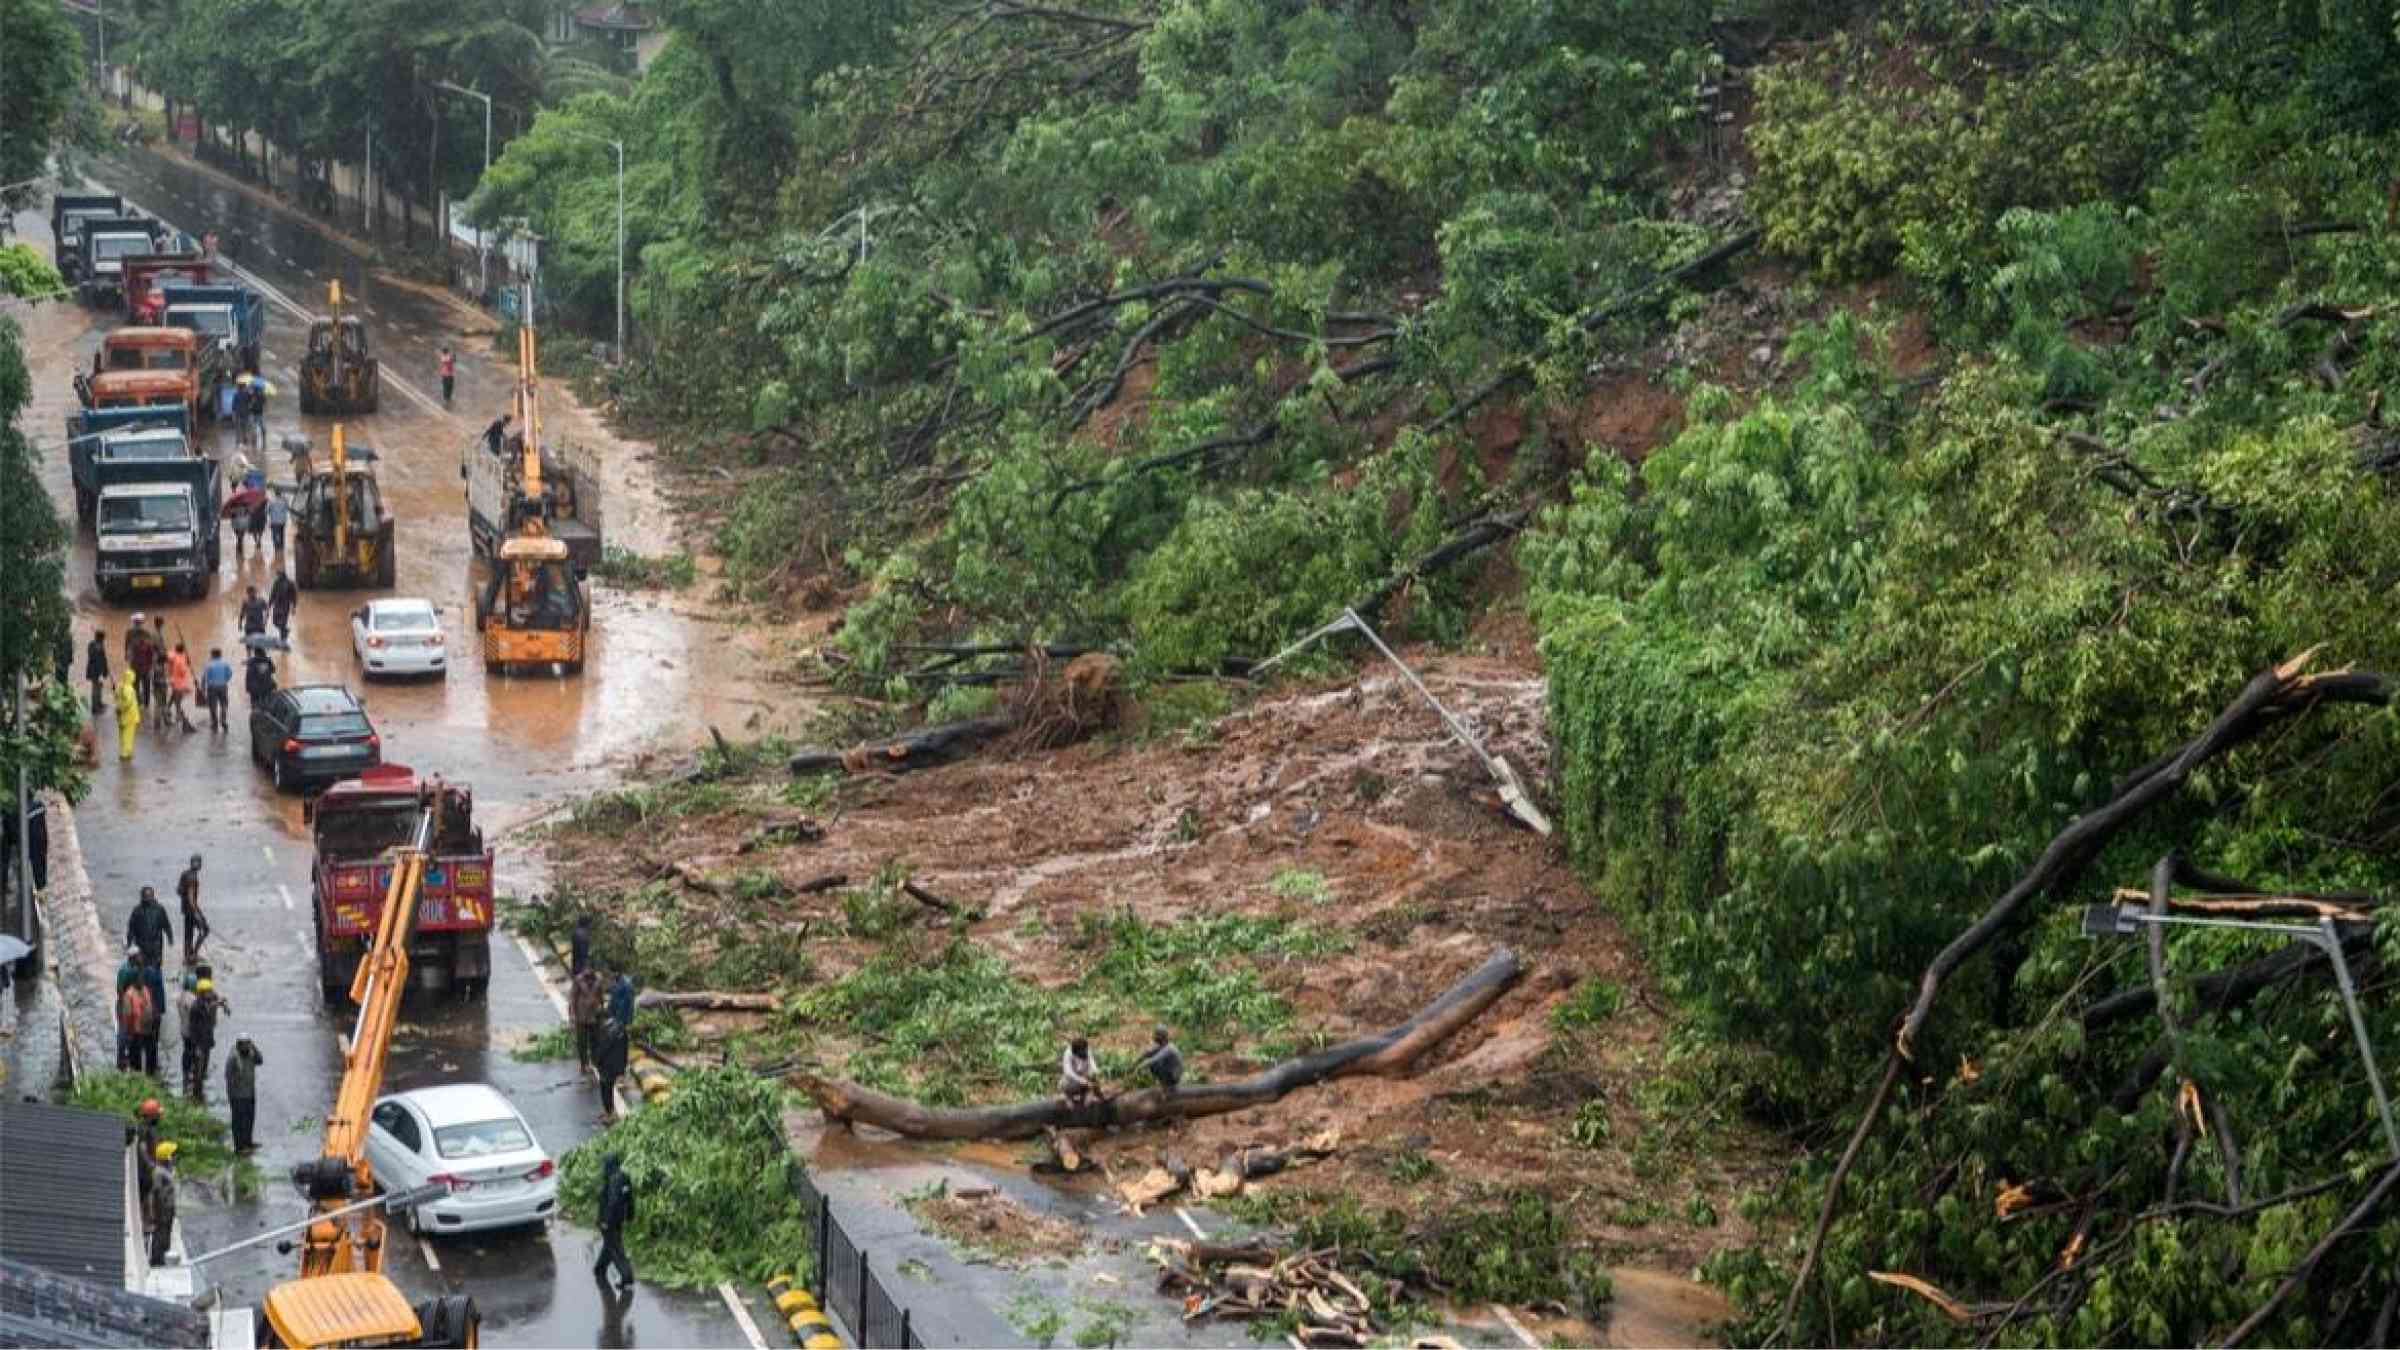 Traffic grows heavy on a Mumbai road after a landslide blocks lanes